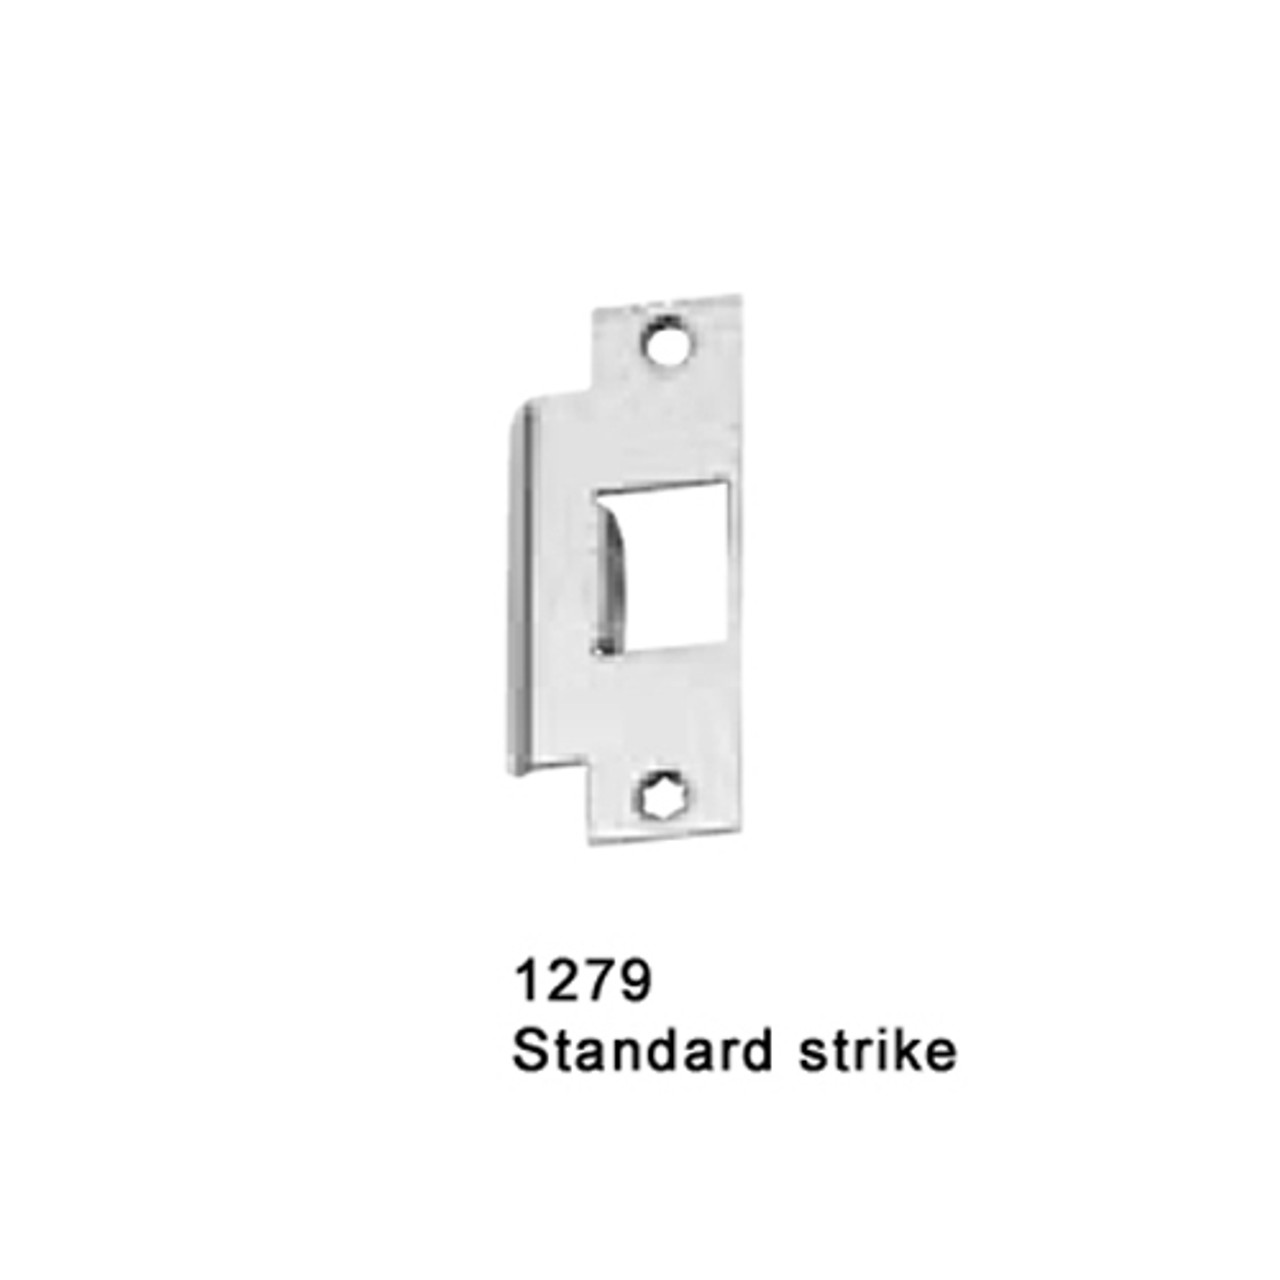 CD25-M-L-NL-DANE-US26D-4-LHR Falcon 25 Series Mortise Lock Devices 510L-NL Dane Lever Trim with Night Latch in Satin Chrome